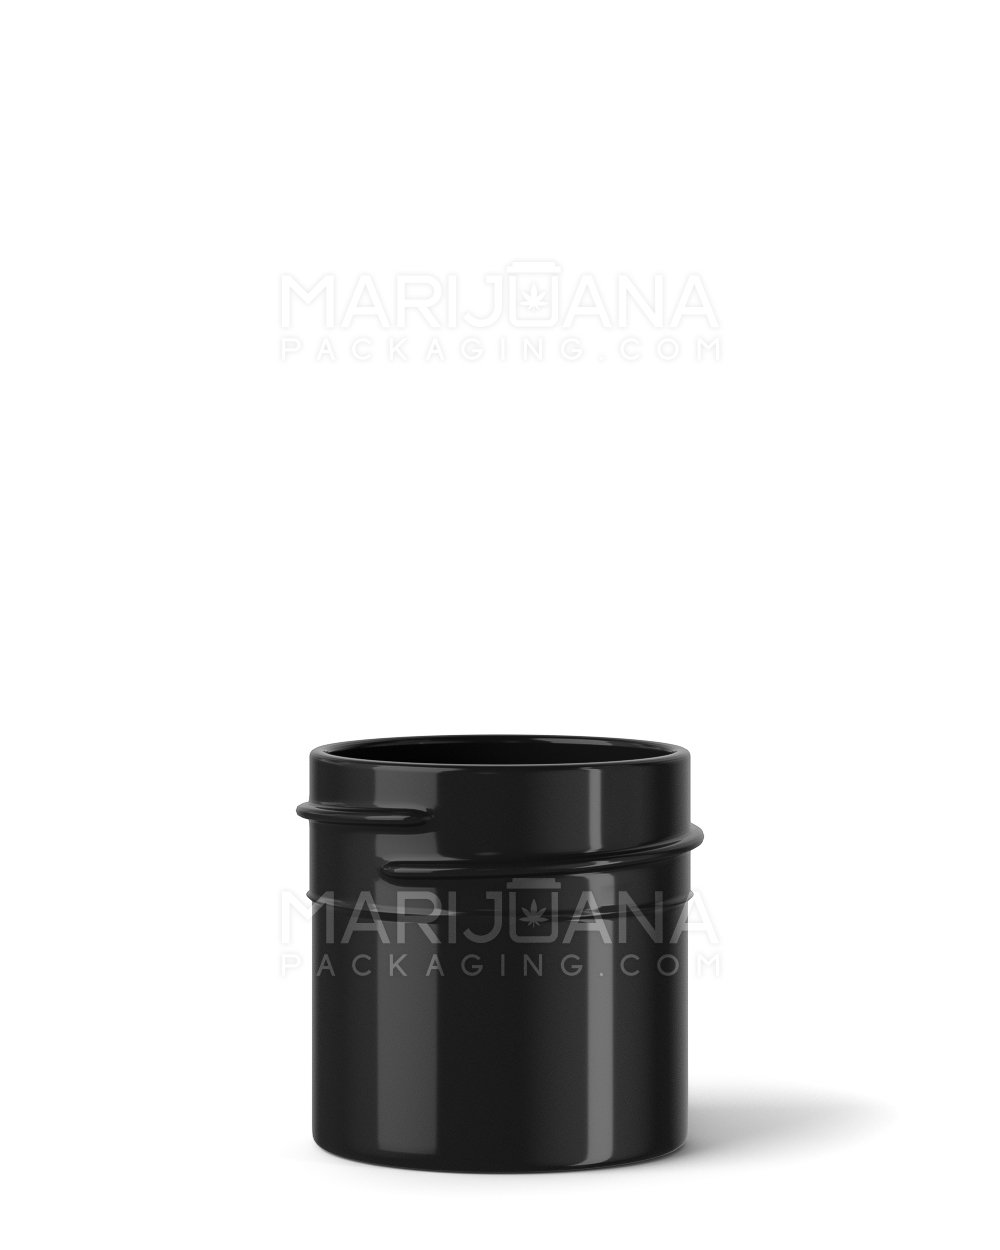 Child Resistant | Push Down & Turn Concentrate Container | 15mL - Black - 500 Count - 2